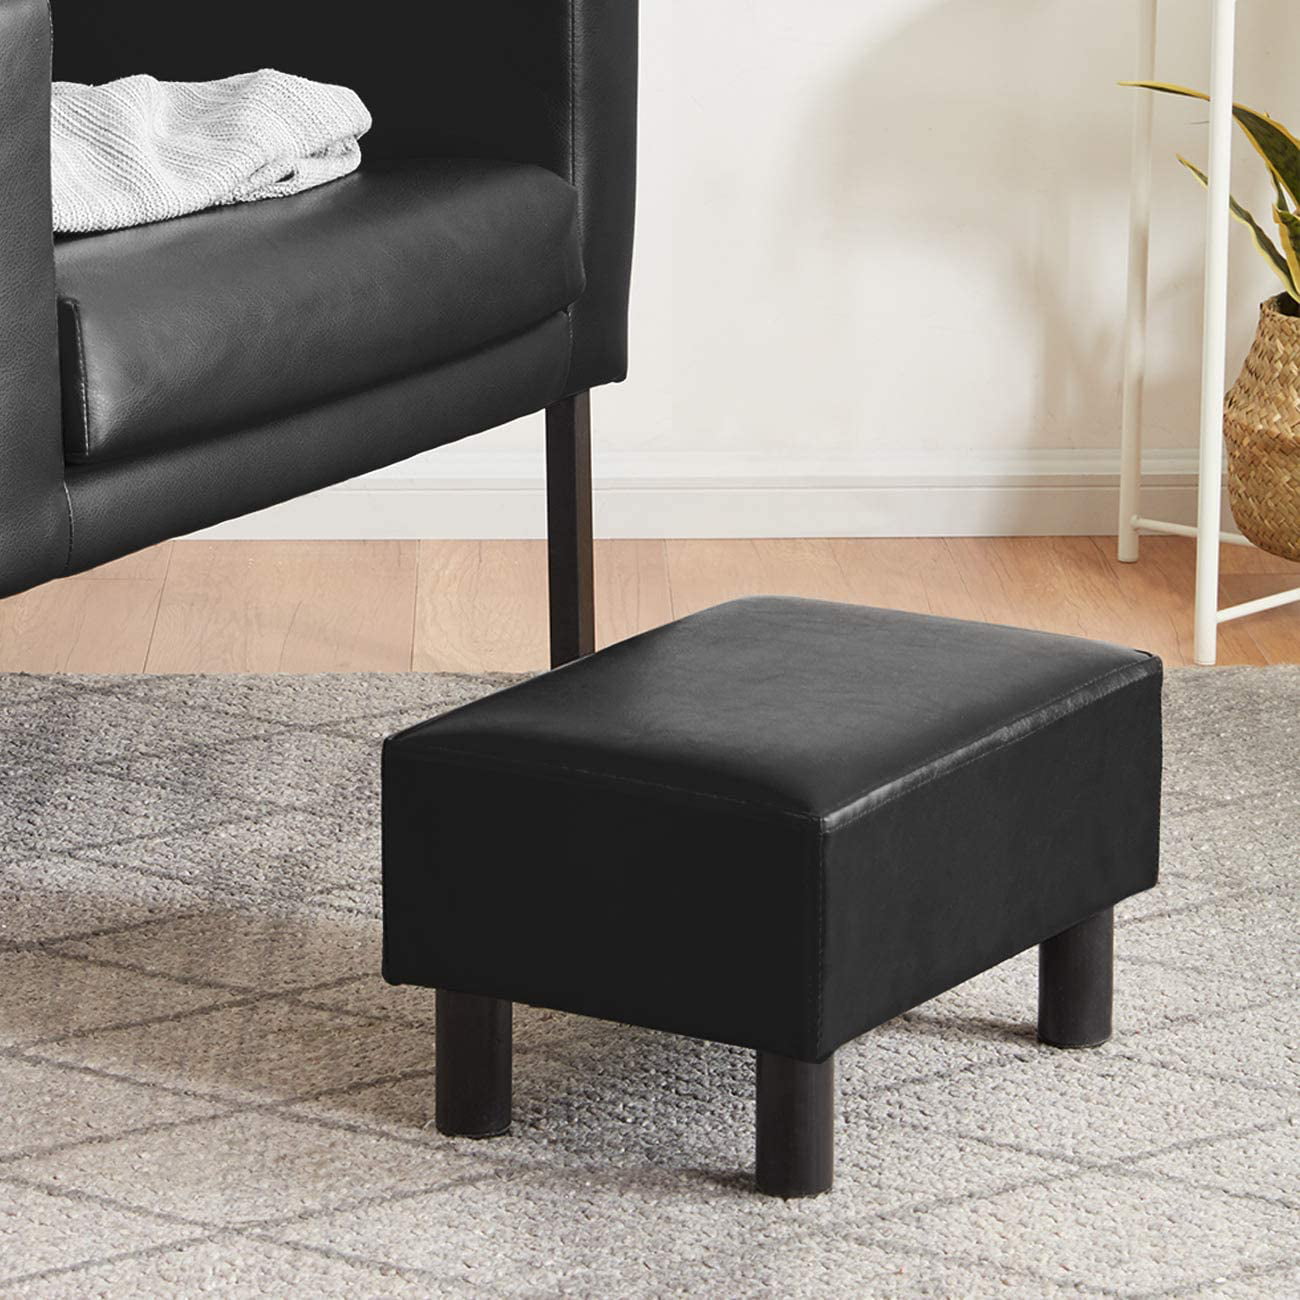 Footstool Pouffe Black Faux Leather.// Black Leather Small Stool Ottoman 